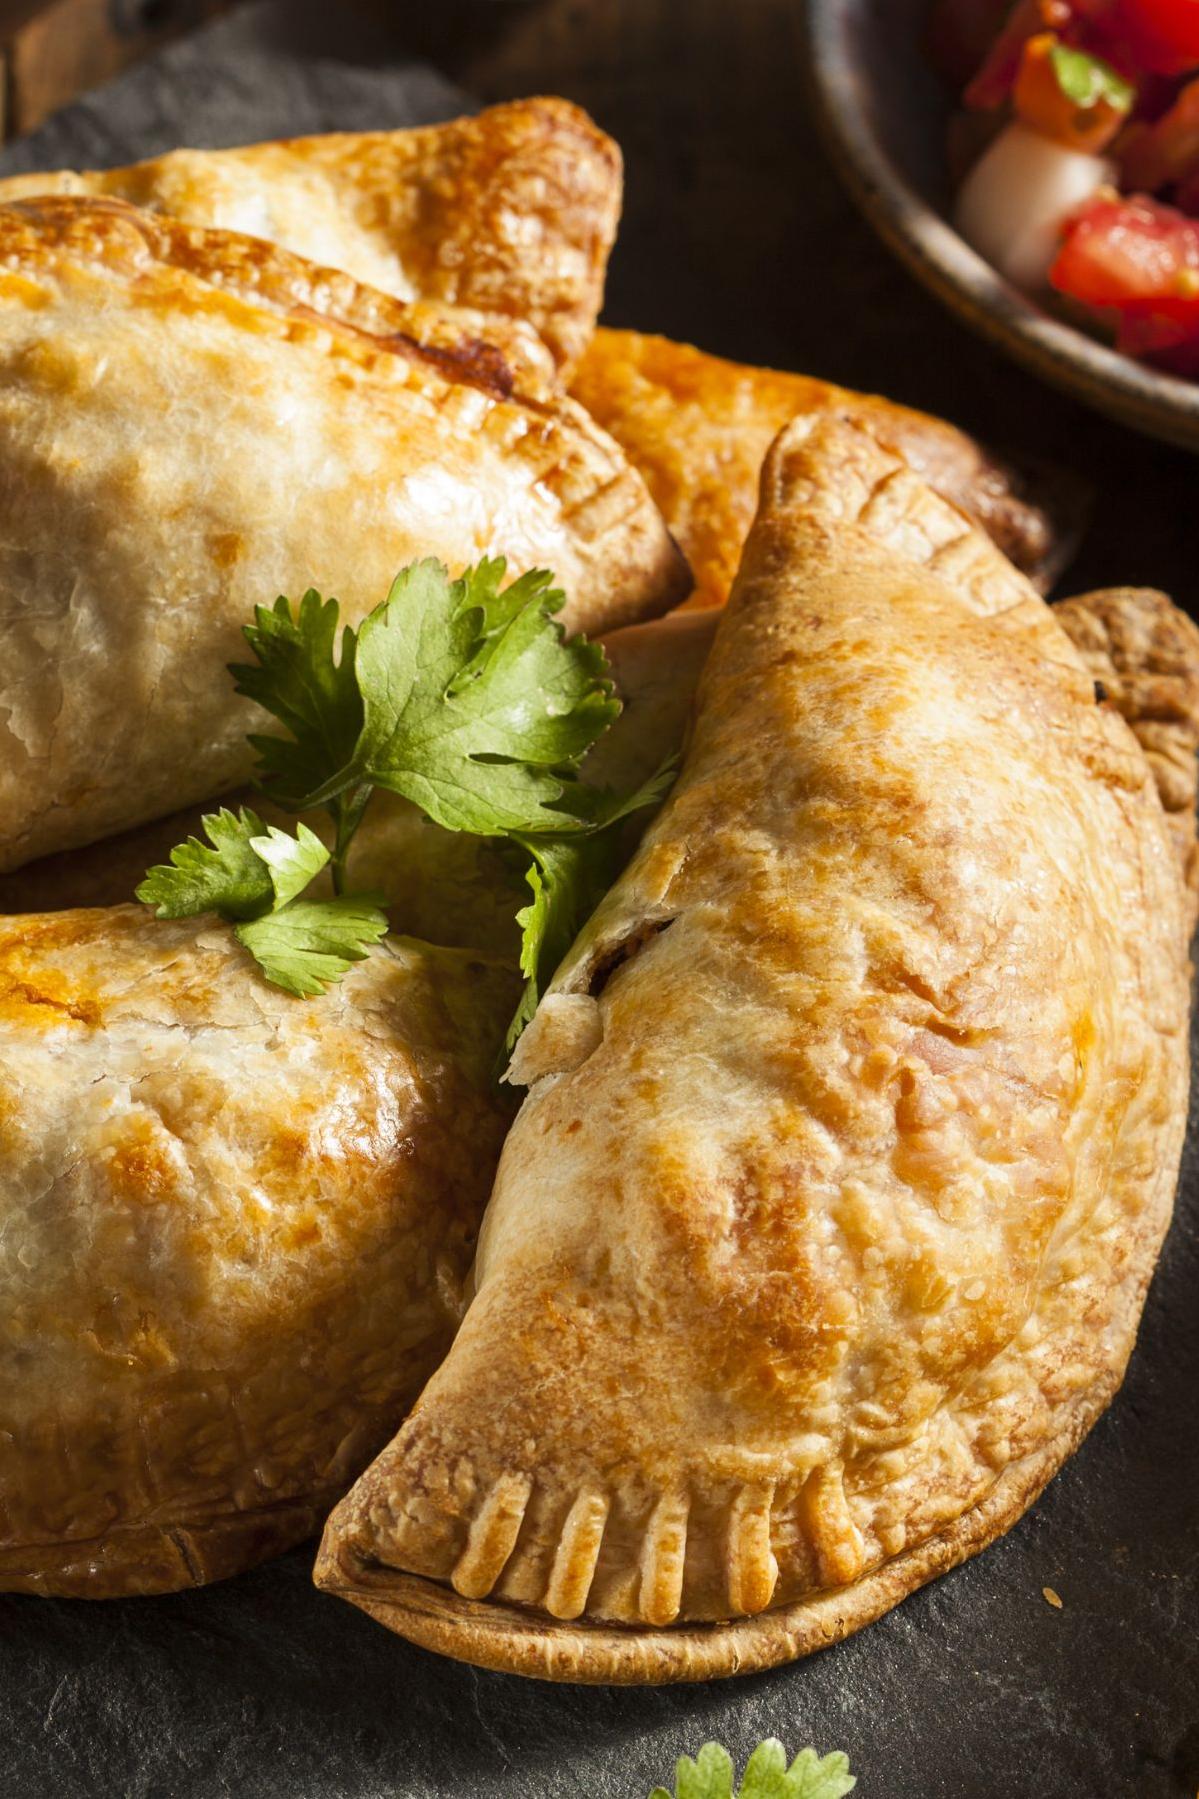  These empanadas are packed with flavor and perfect for sharing!